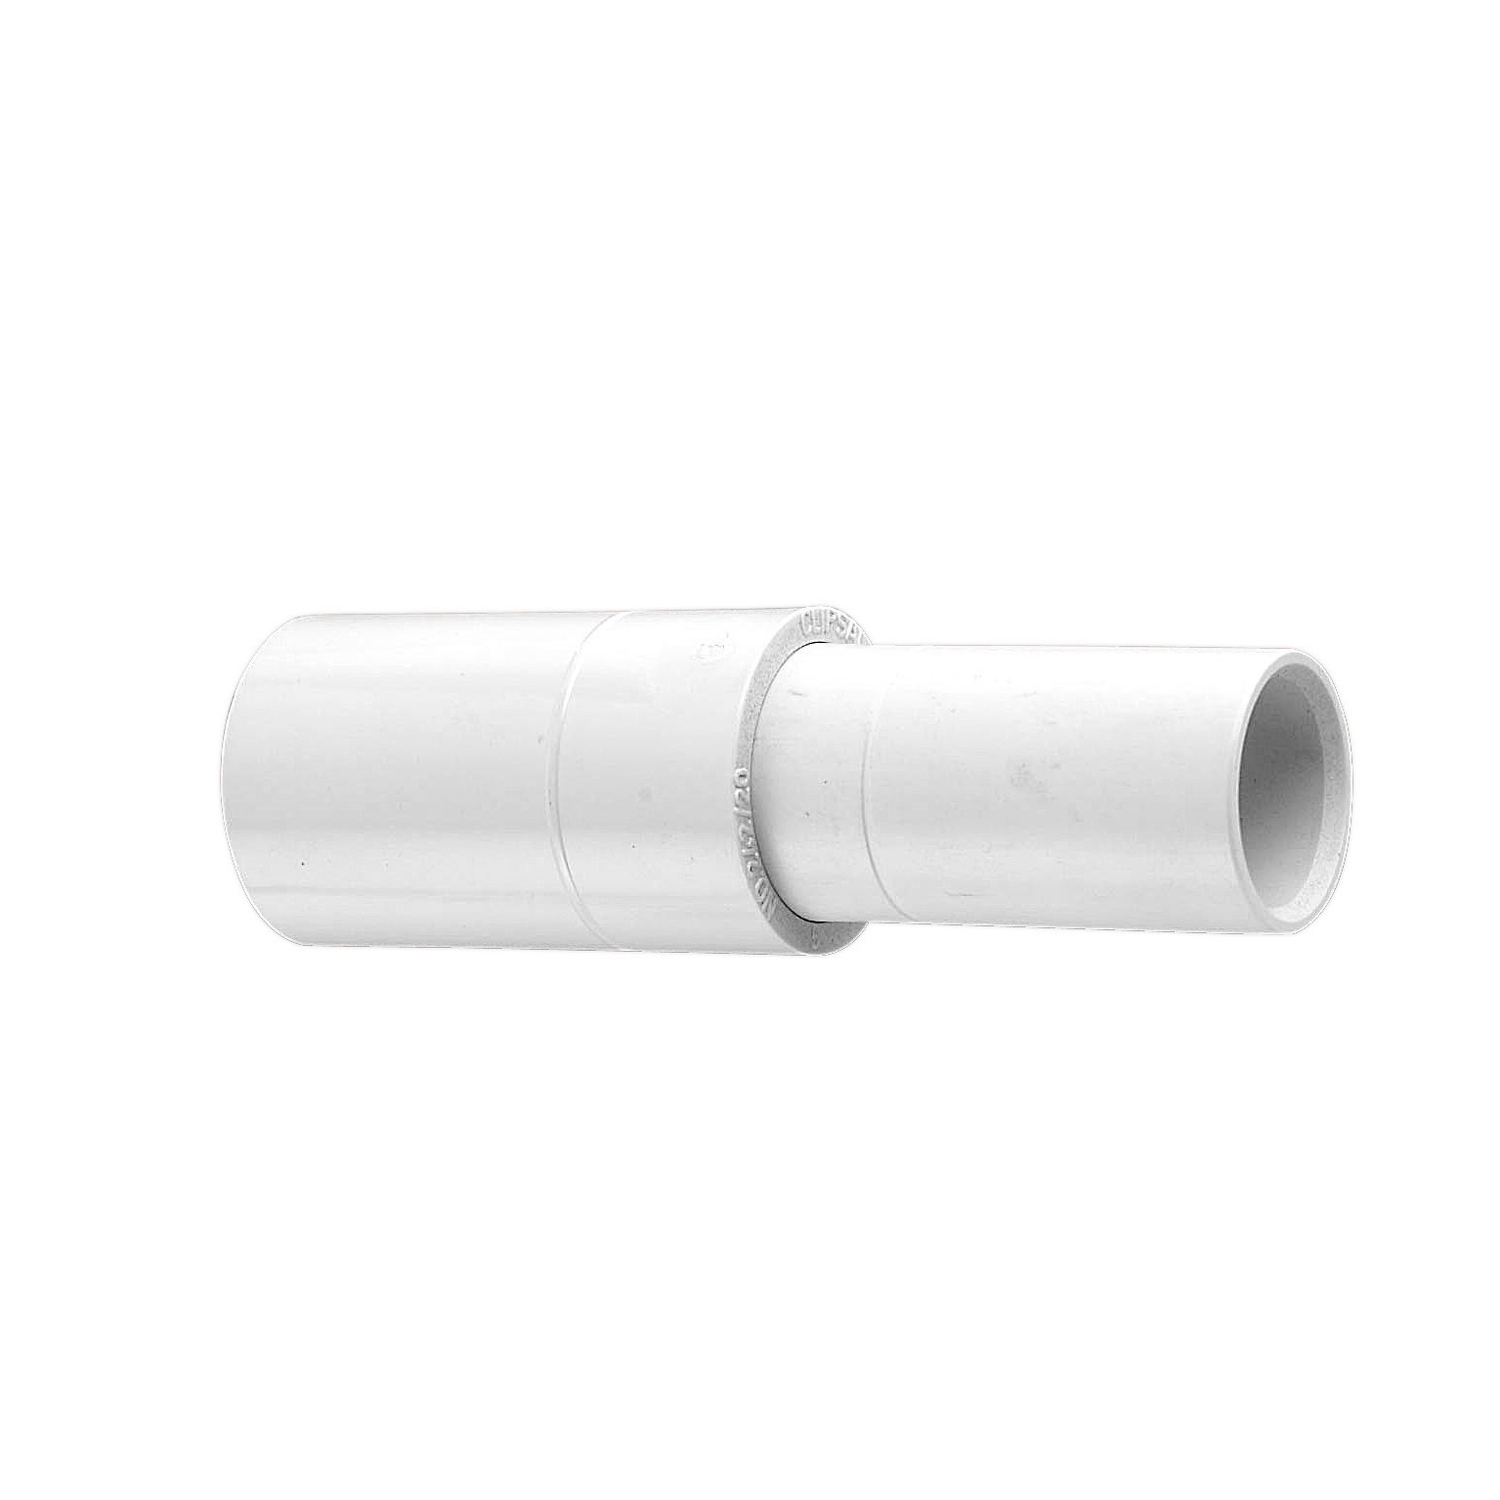 Solid Fittings - PVC, Expansion Couplings - Slip Type, 20mm, Grey